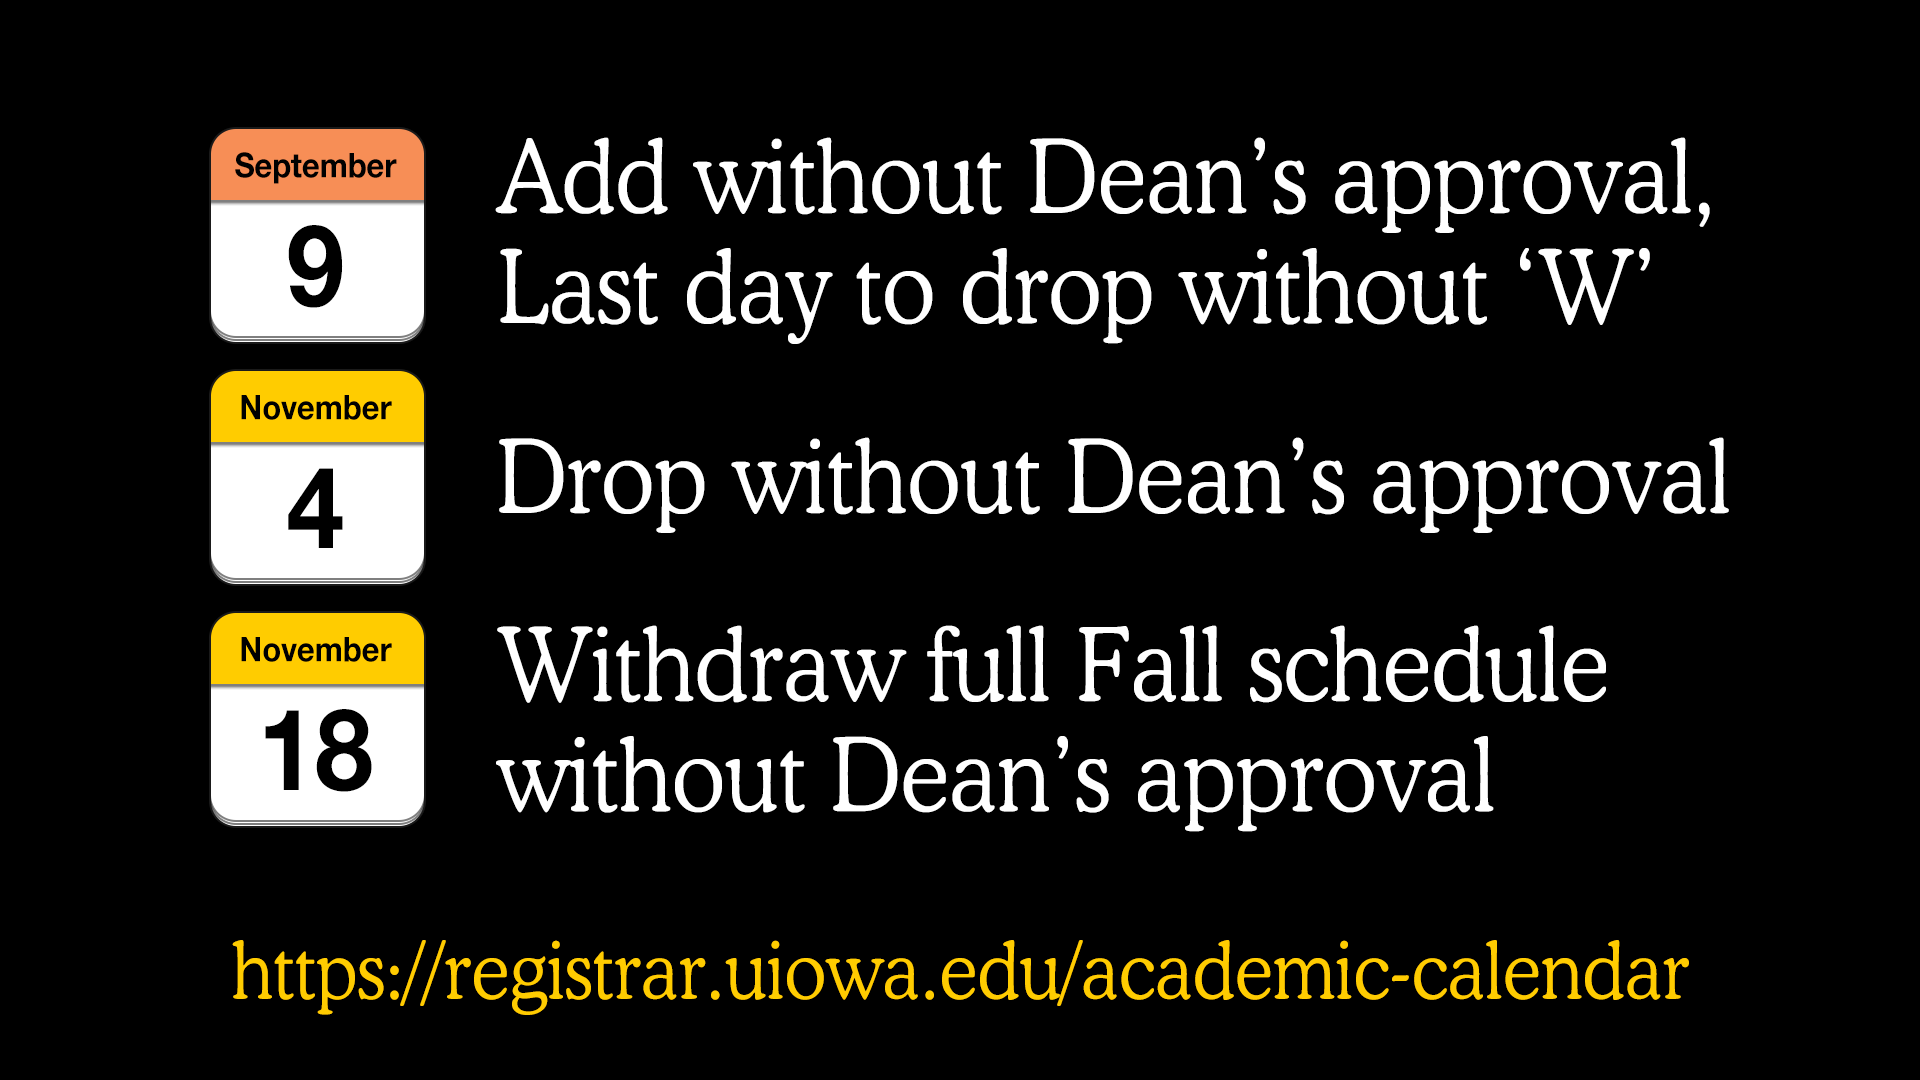 September 9, 2019 - Add without Dean's approval, last day to drop without 'W'. November 4, 2019 - Drop without Dean's approval. November 18, 2019 - Withdraw full Fall schedule without Dean's approval. https://registrar.uiowa.edu/academic-calendar.